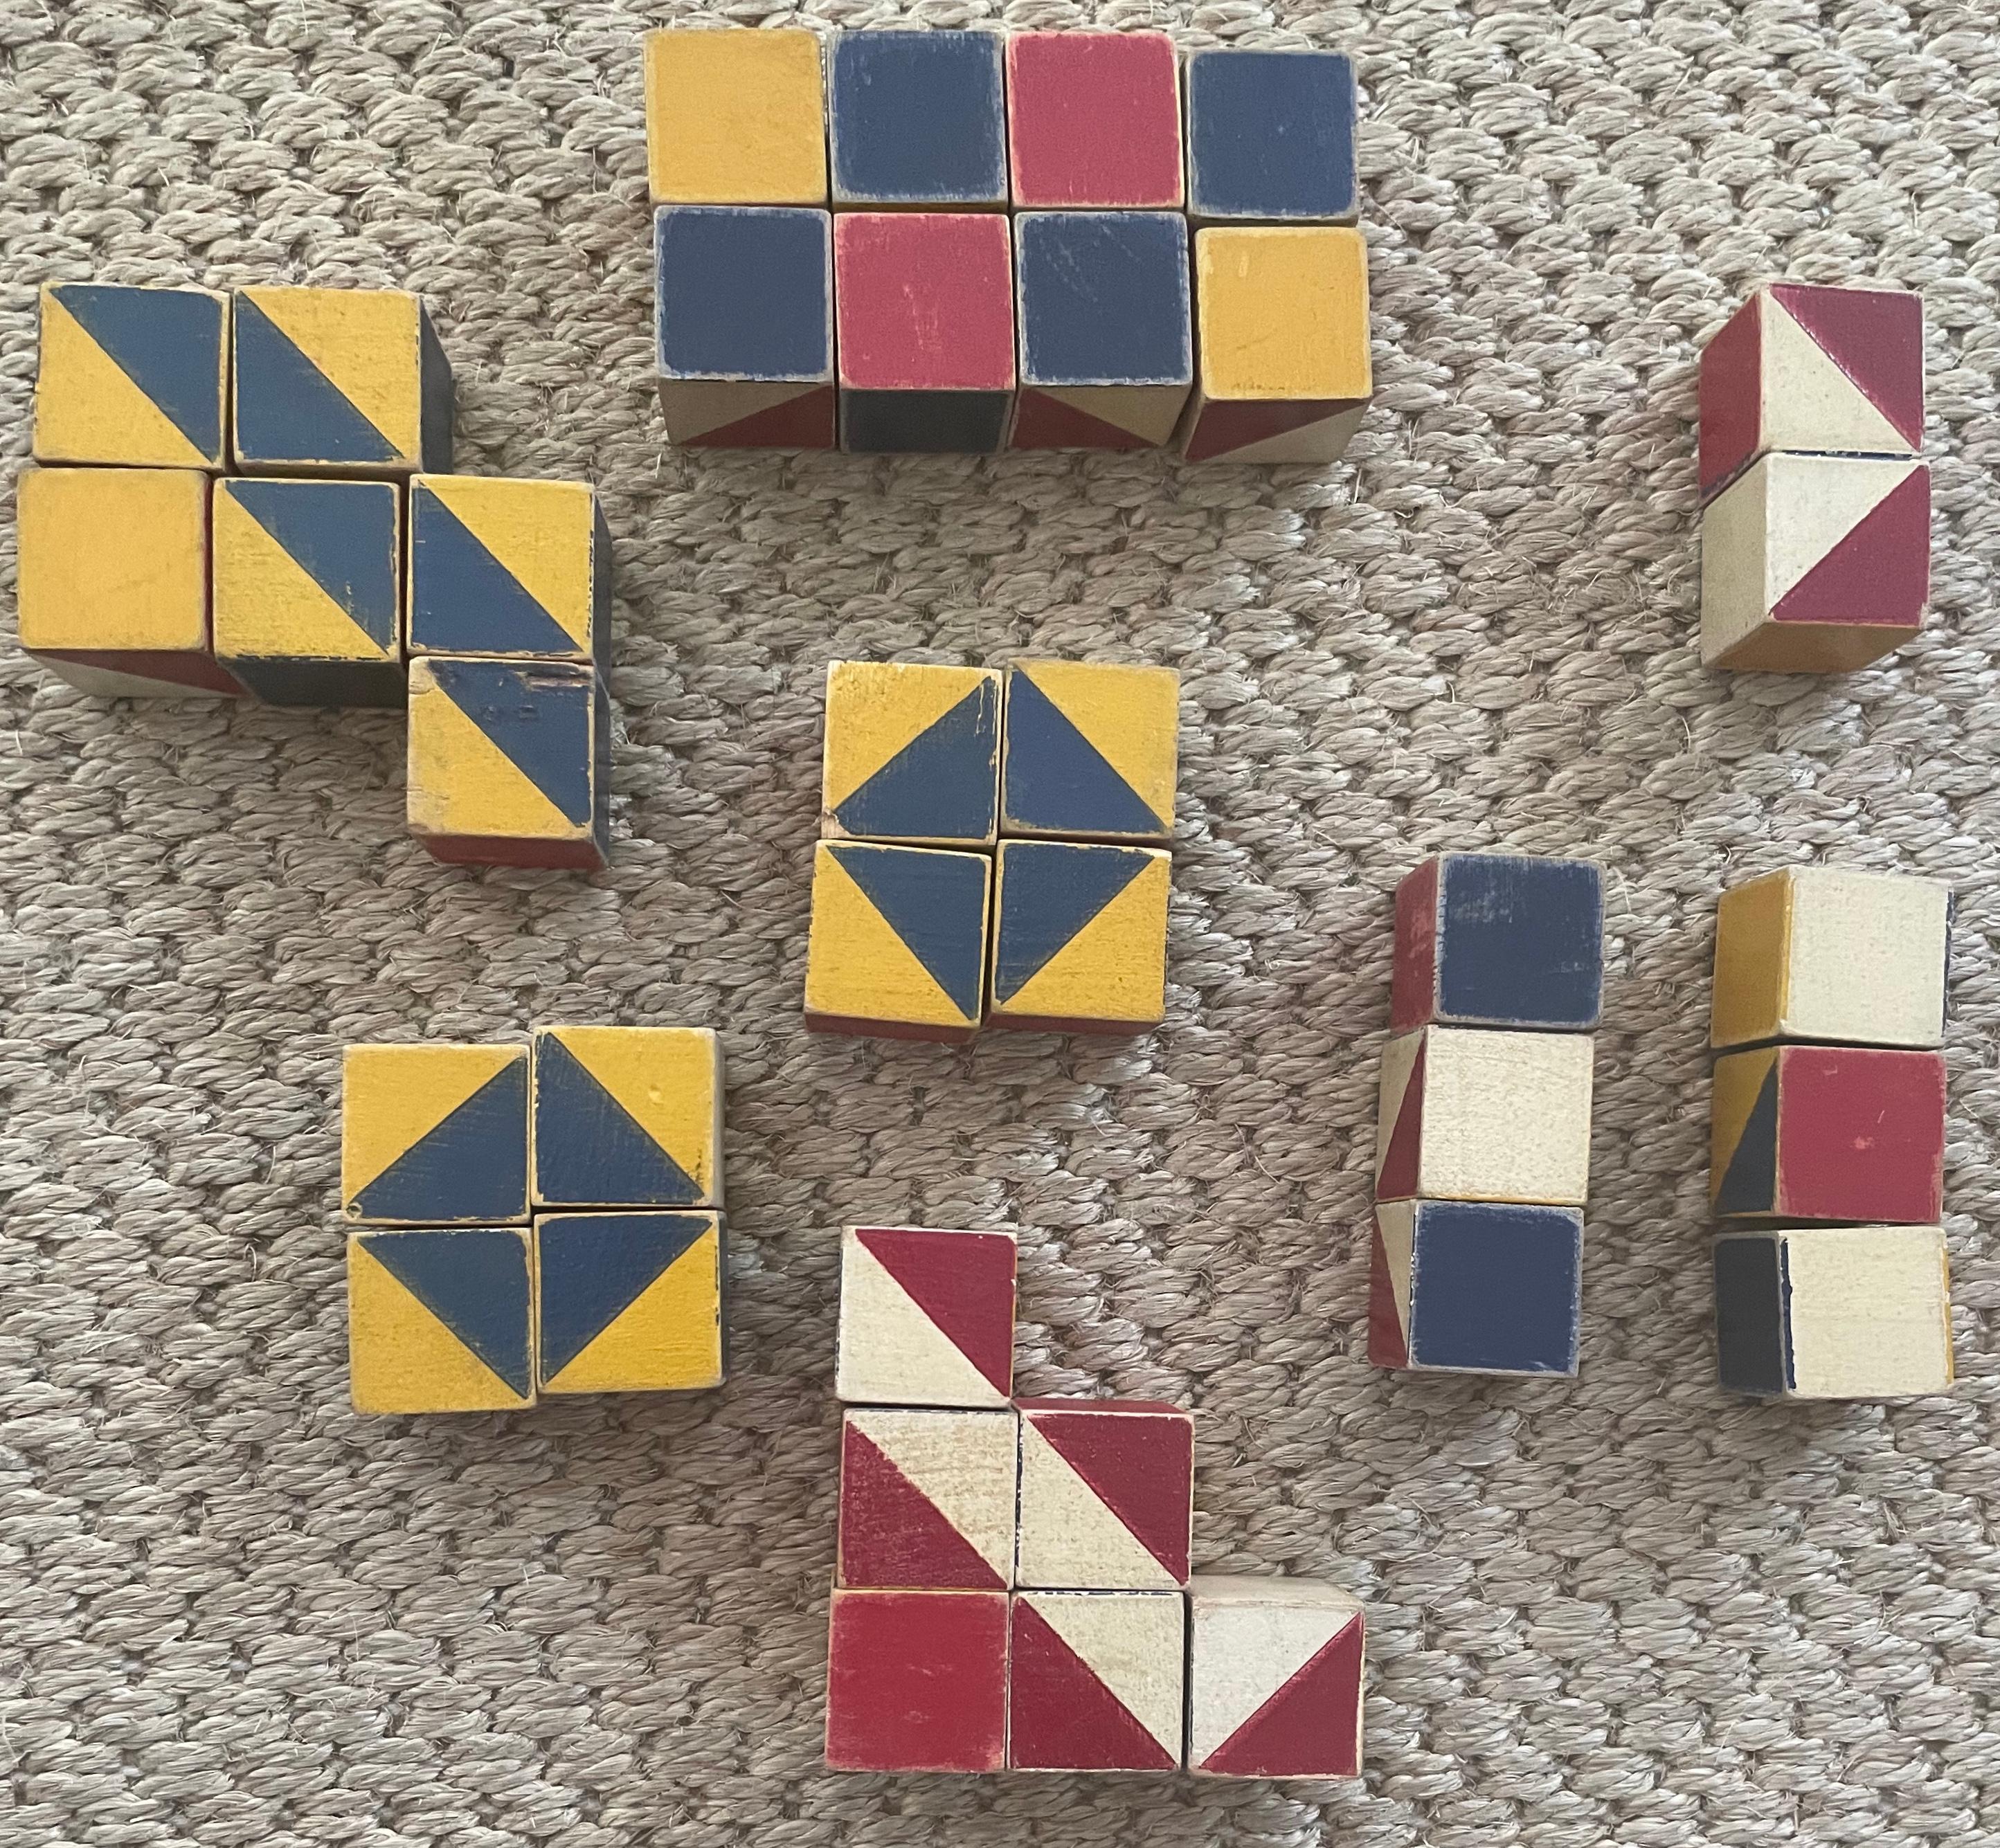 Painted wood design blocks. Multiple diverse and amusing design variations available from painted 1” wood blocks in yellow, red, white blue, and coloured stripes 
United States, midcentury.
Dimensions: each block is 1